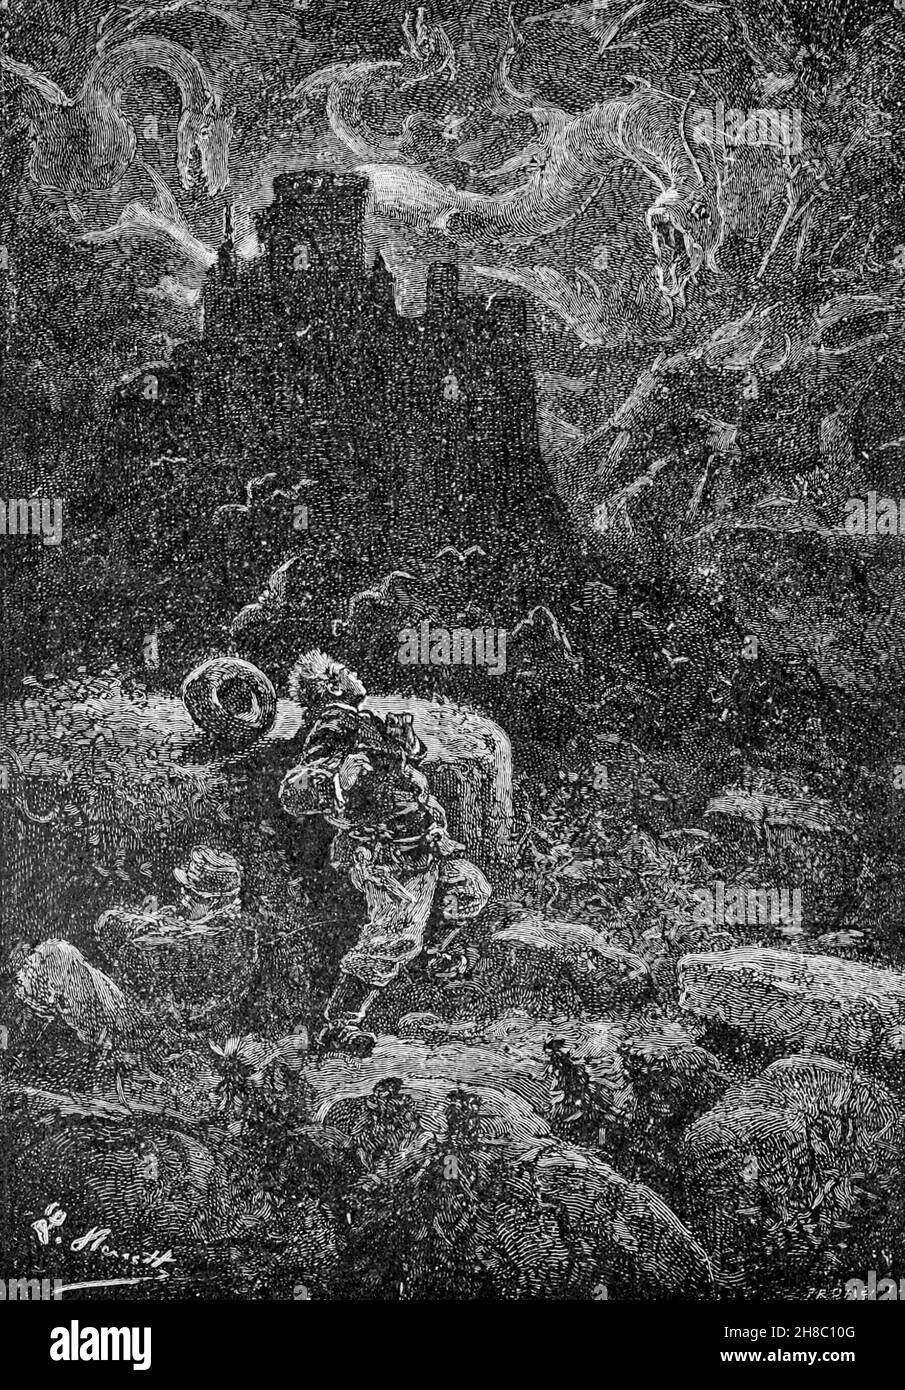 He heard the nyctalops from ' The Carpathian Castle ' (or The castle of the Carpathians) by Jules, Verne, 1828-1905. May have been the inspiration for Dracula, Published in New York, by Merriam in 1894 In the village of Werst in the Carpathian mountains of Transylvania, some mysterious things are occurring and the villagers believe that Chort (the devil) occupies the castle. A visitor to the region, Count Franz de Telek, is intrigued by the stories and decides to go to the castle and investigate. He finds that the owner of the castle is Baron Rodolphe de Gortz, with whom he is acquainted; year Stock Photo